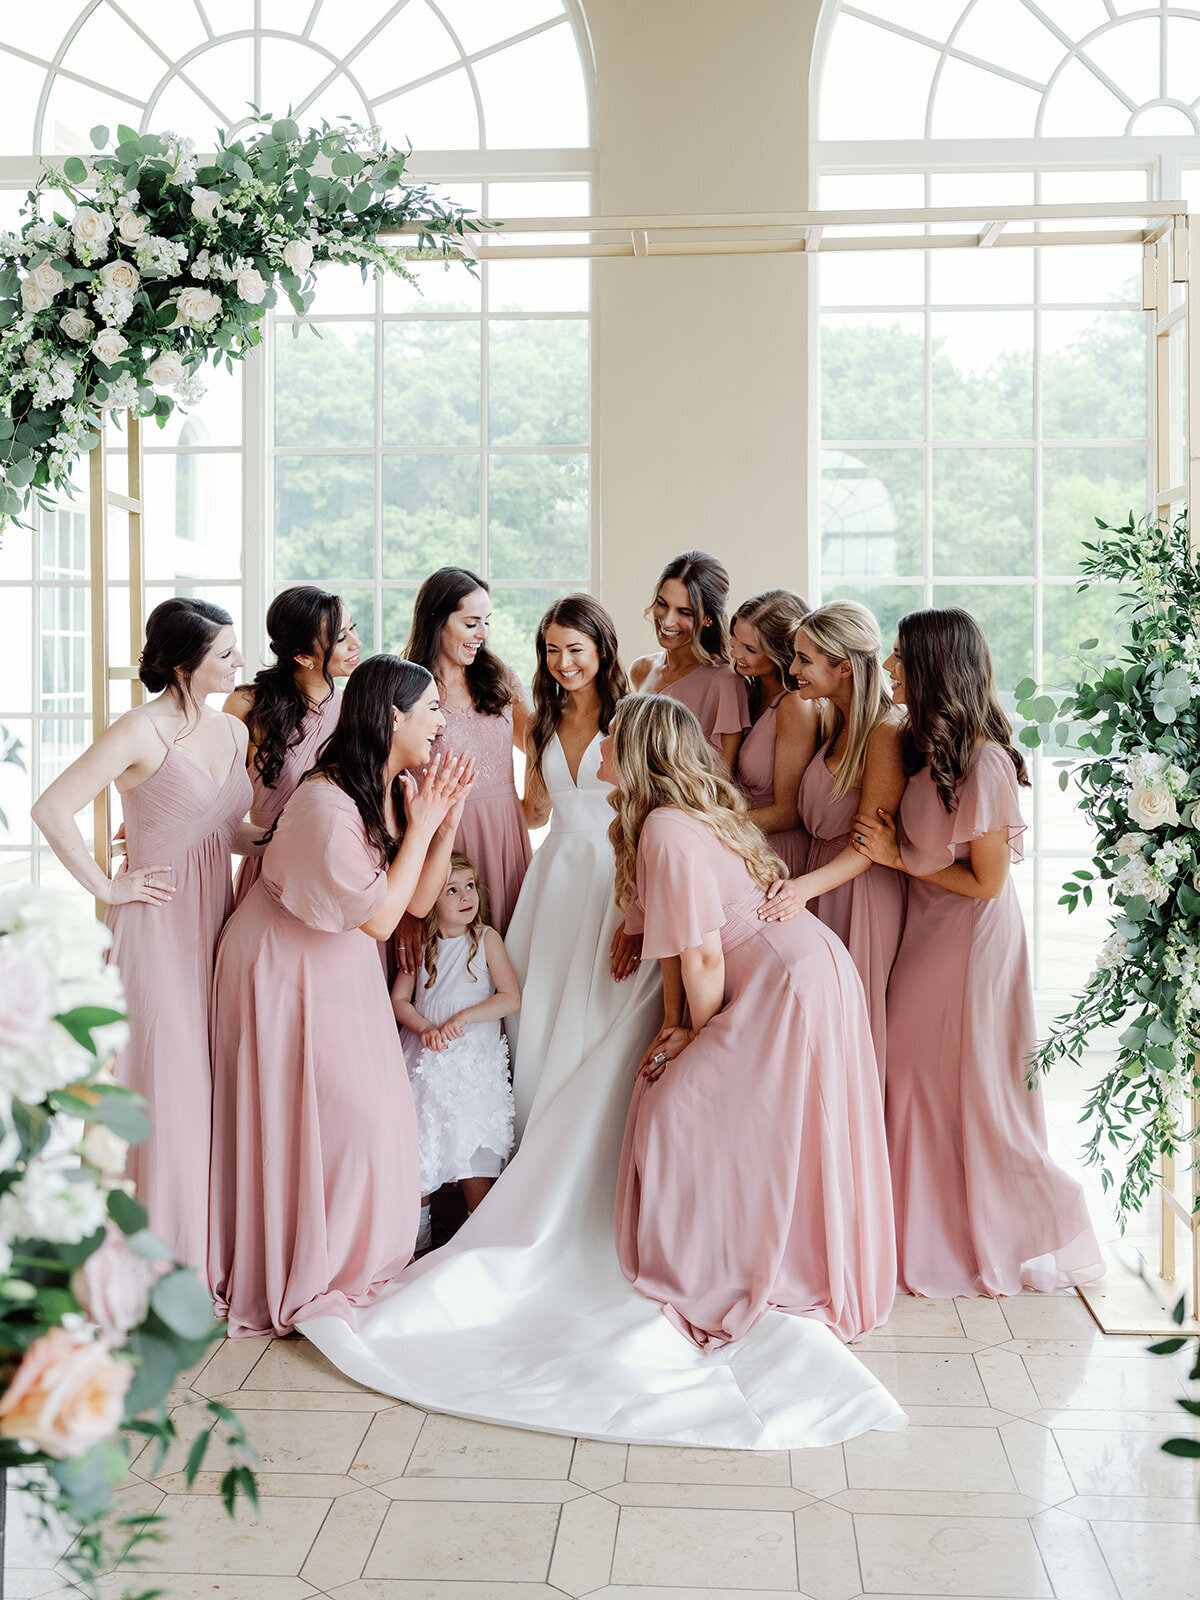 Brid is surrounded by bridesmaids wearing blush colored dresses